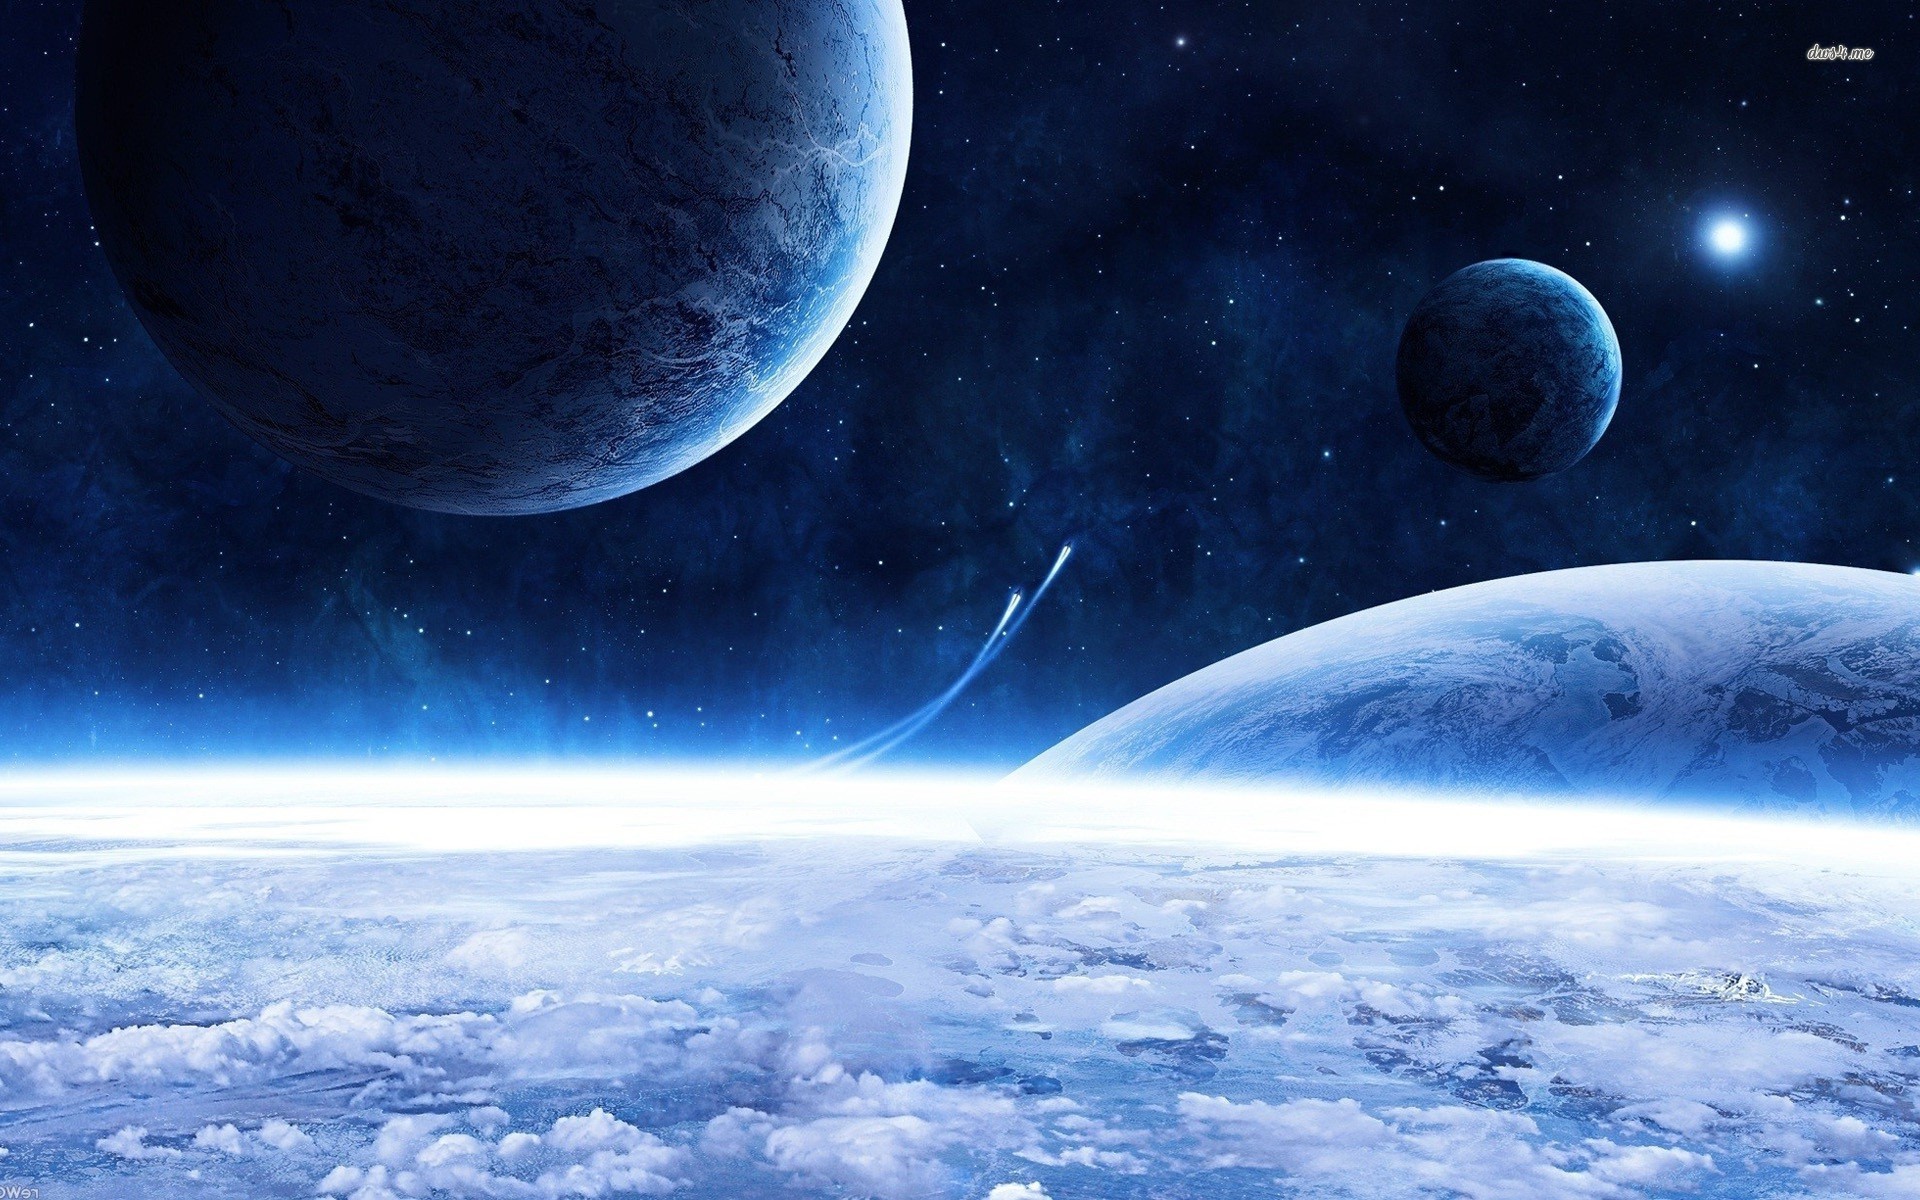 Blue Space wallpaper ·① Download free amazing wallpapers for desktop